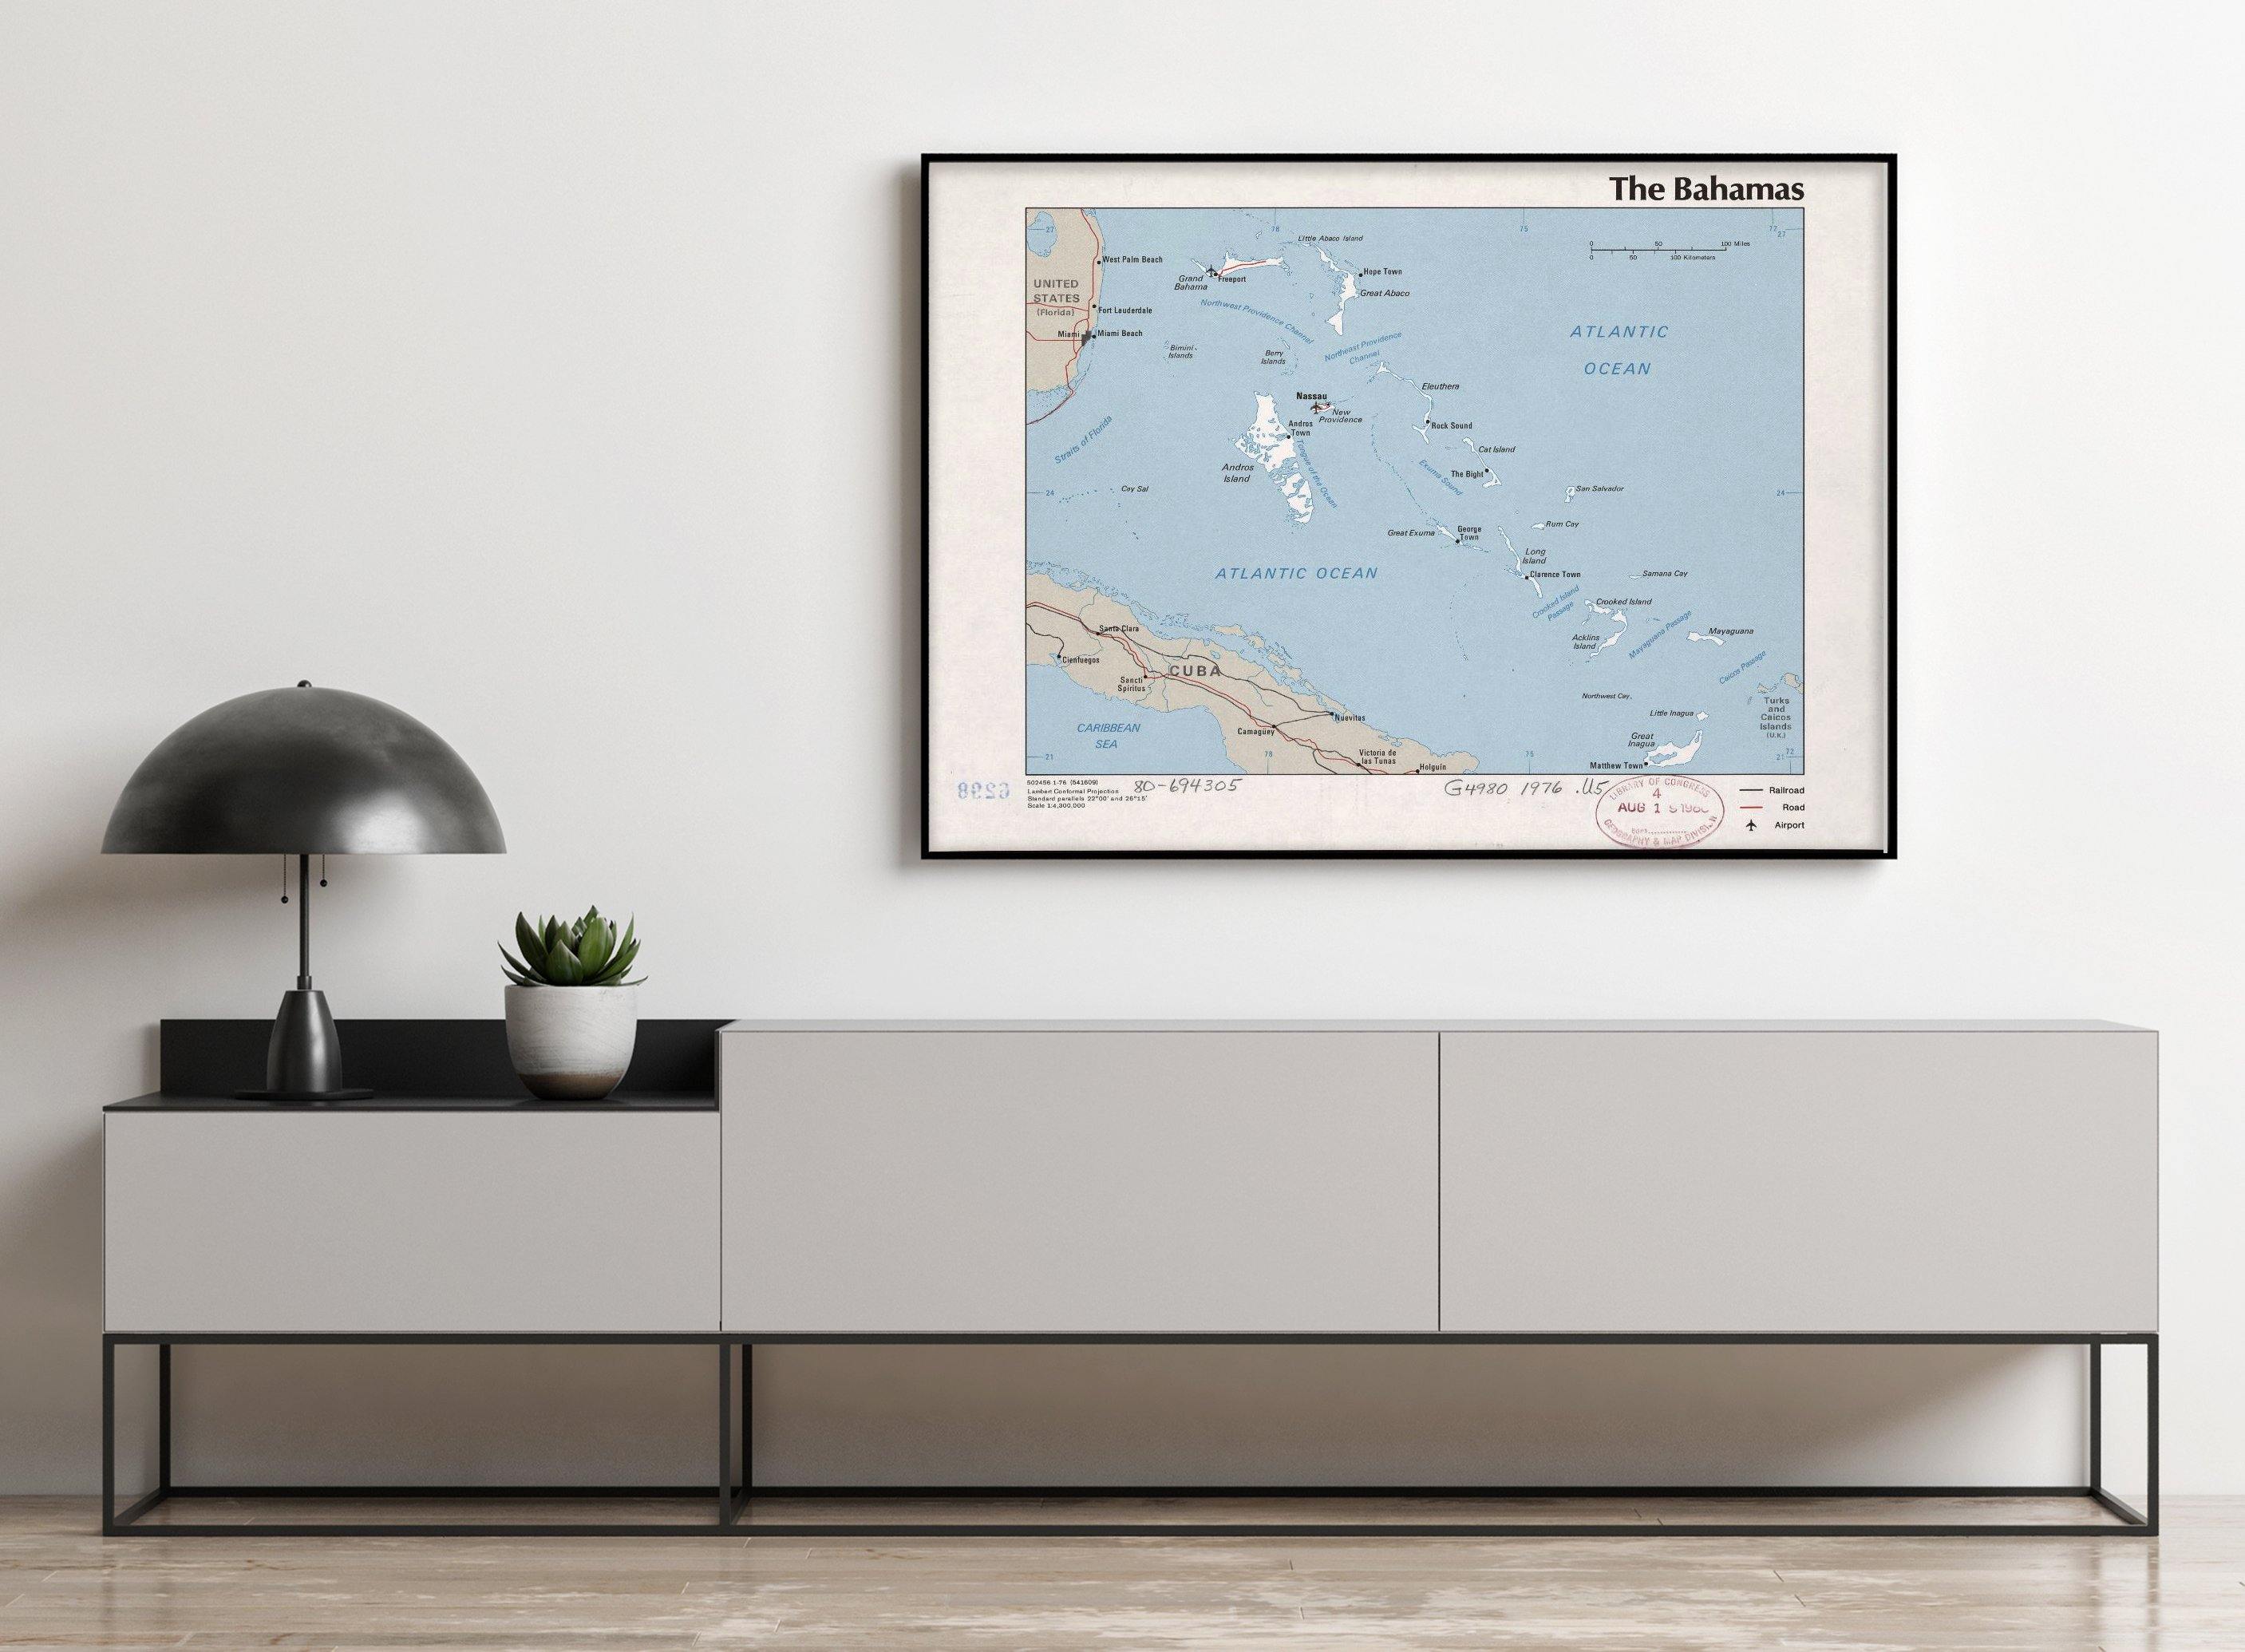 1976 Map| The Bahamas| Bahamas Map Size: 18 inches x 24 inches |Fits 1 - New York Map Company